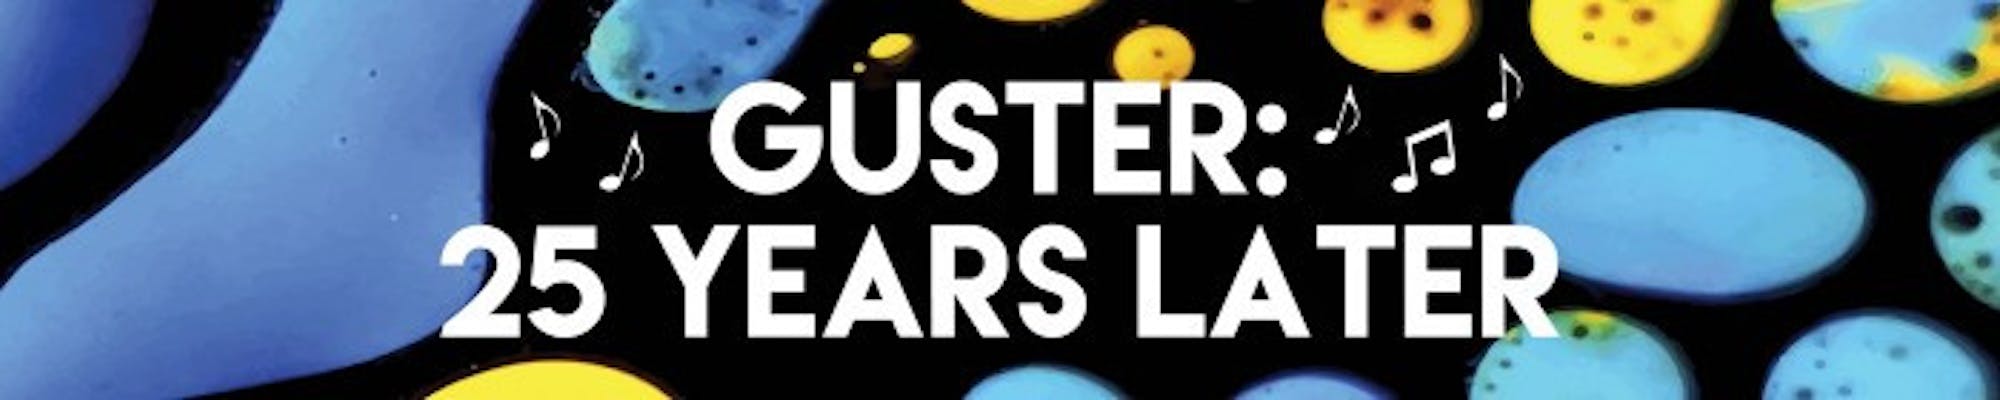 Guster - 25 Years Later WEB